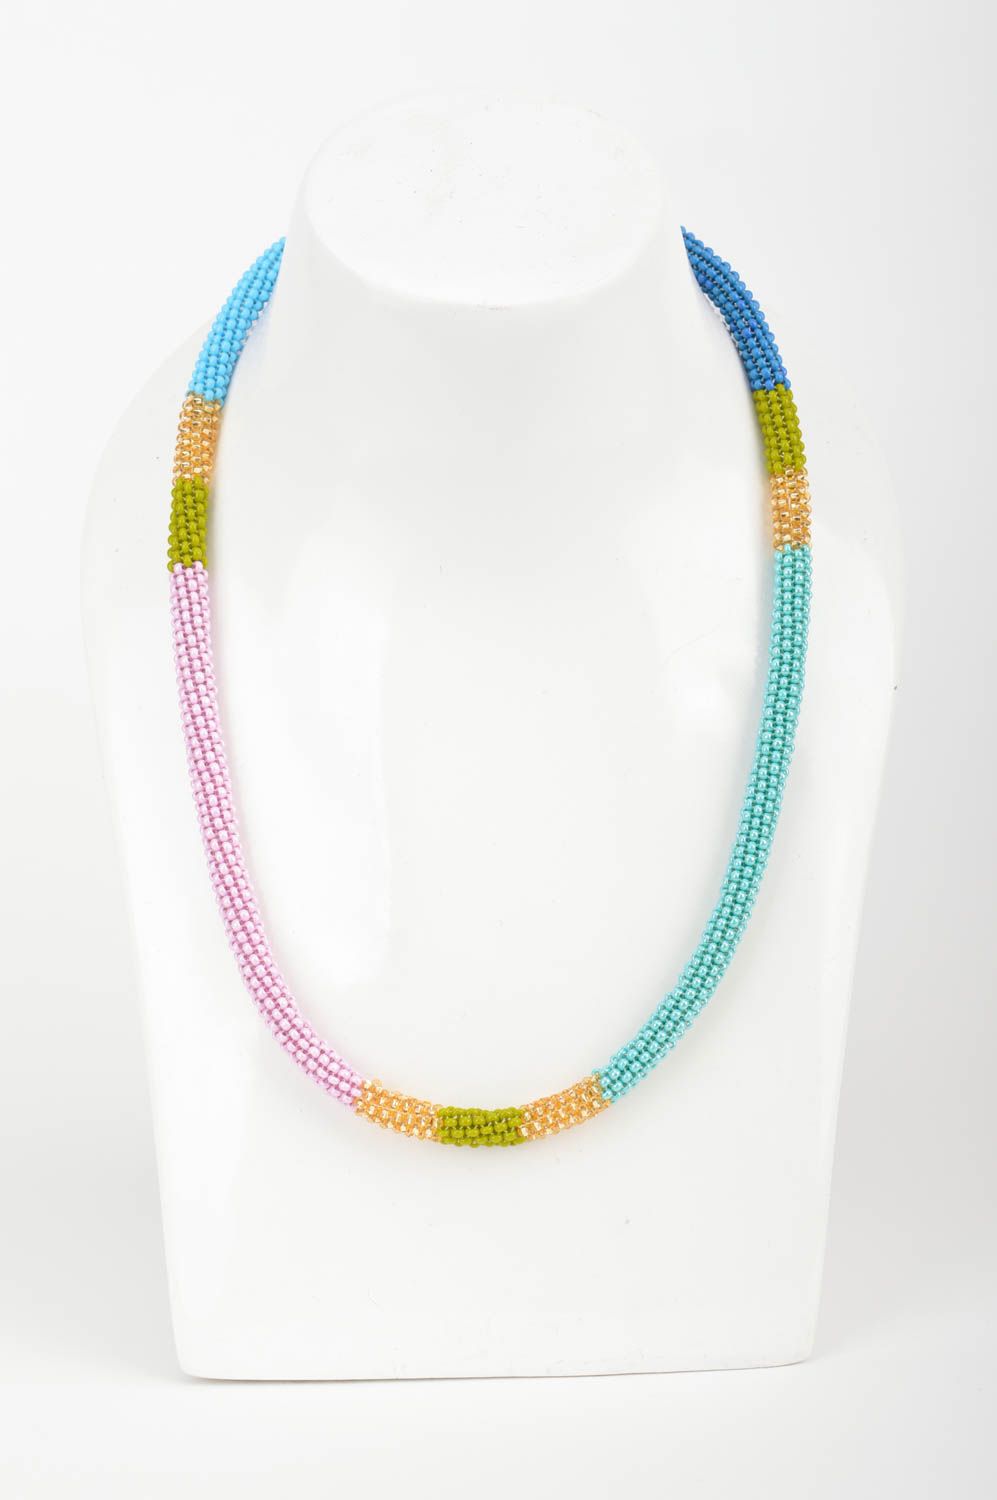 Bright stylish homemade designer beaded cord necklace for fashionistas photo 1